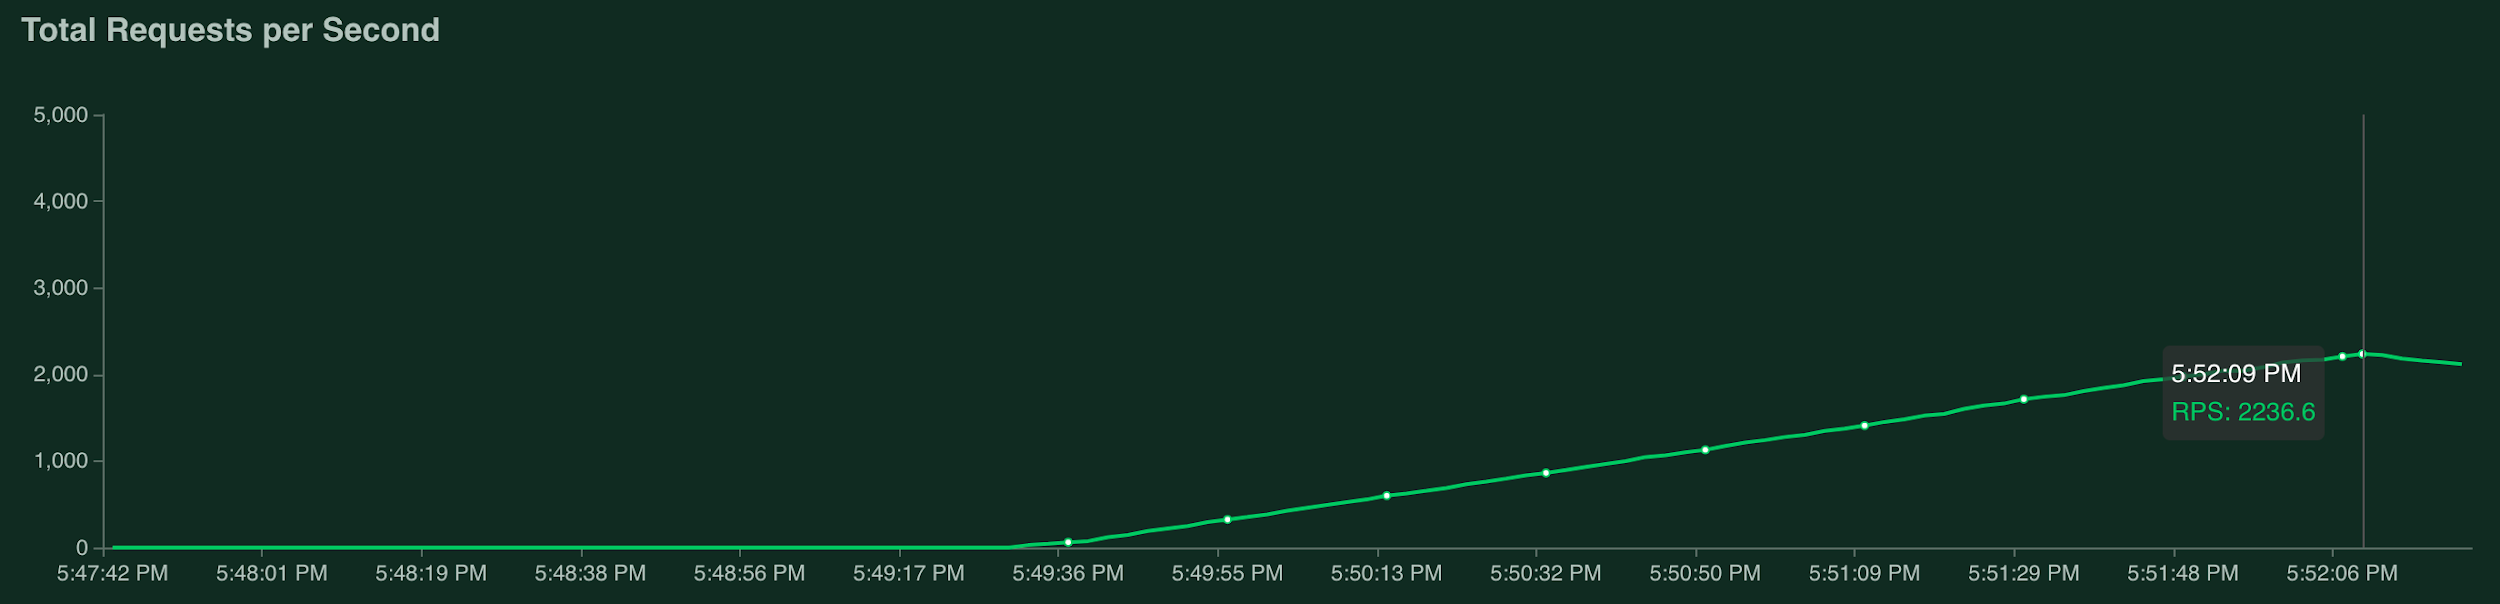 Graph showing 2236.6 requests per second.